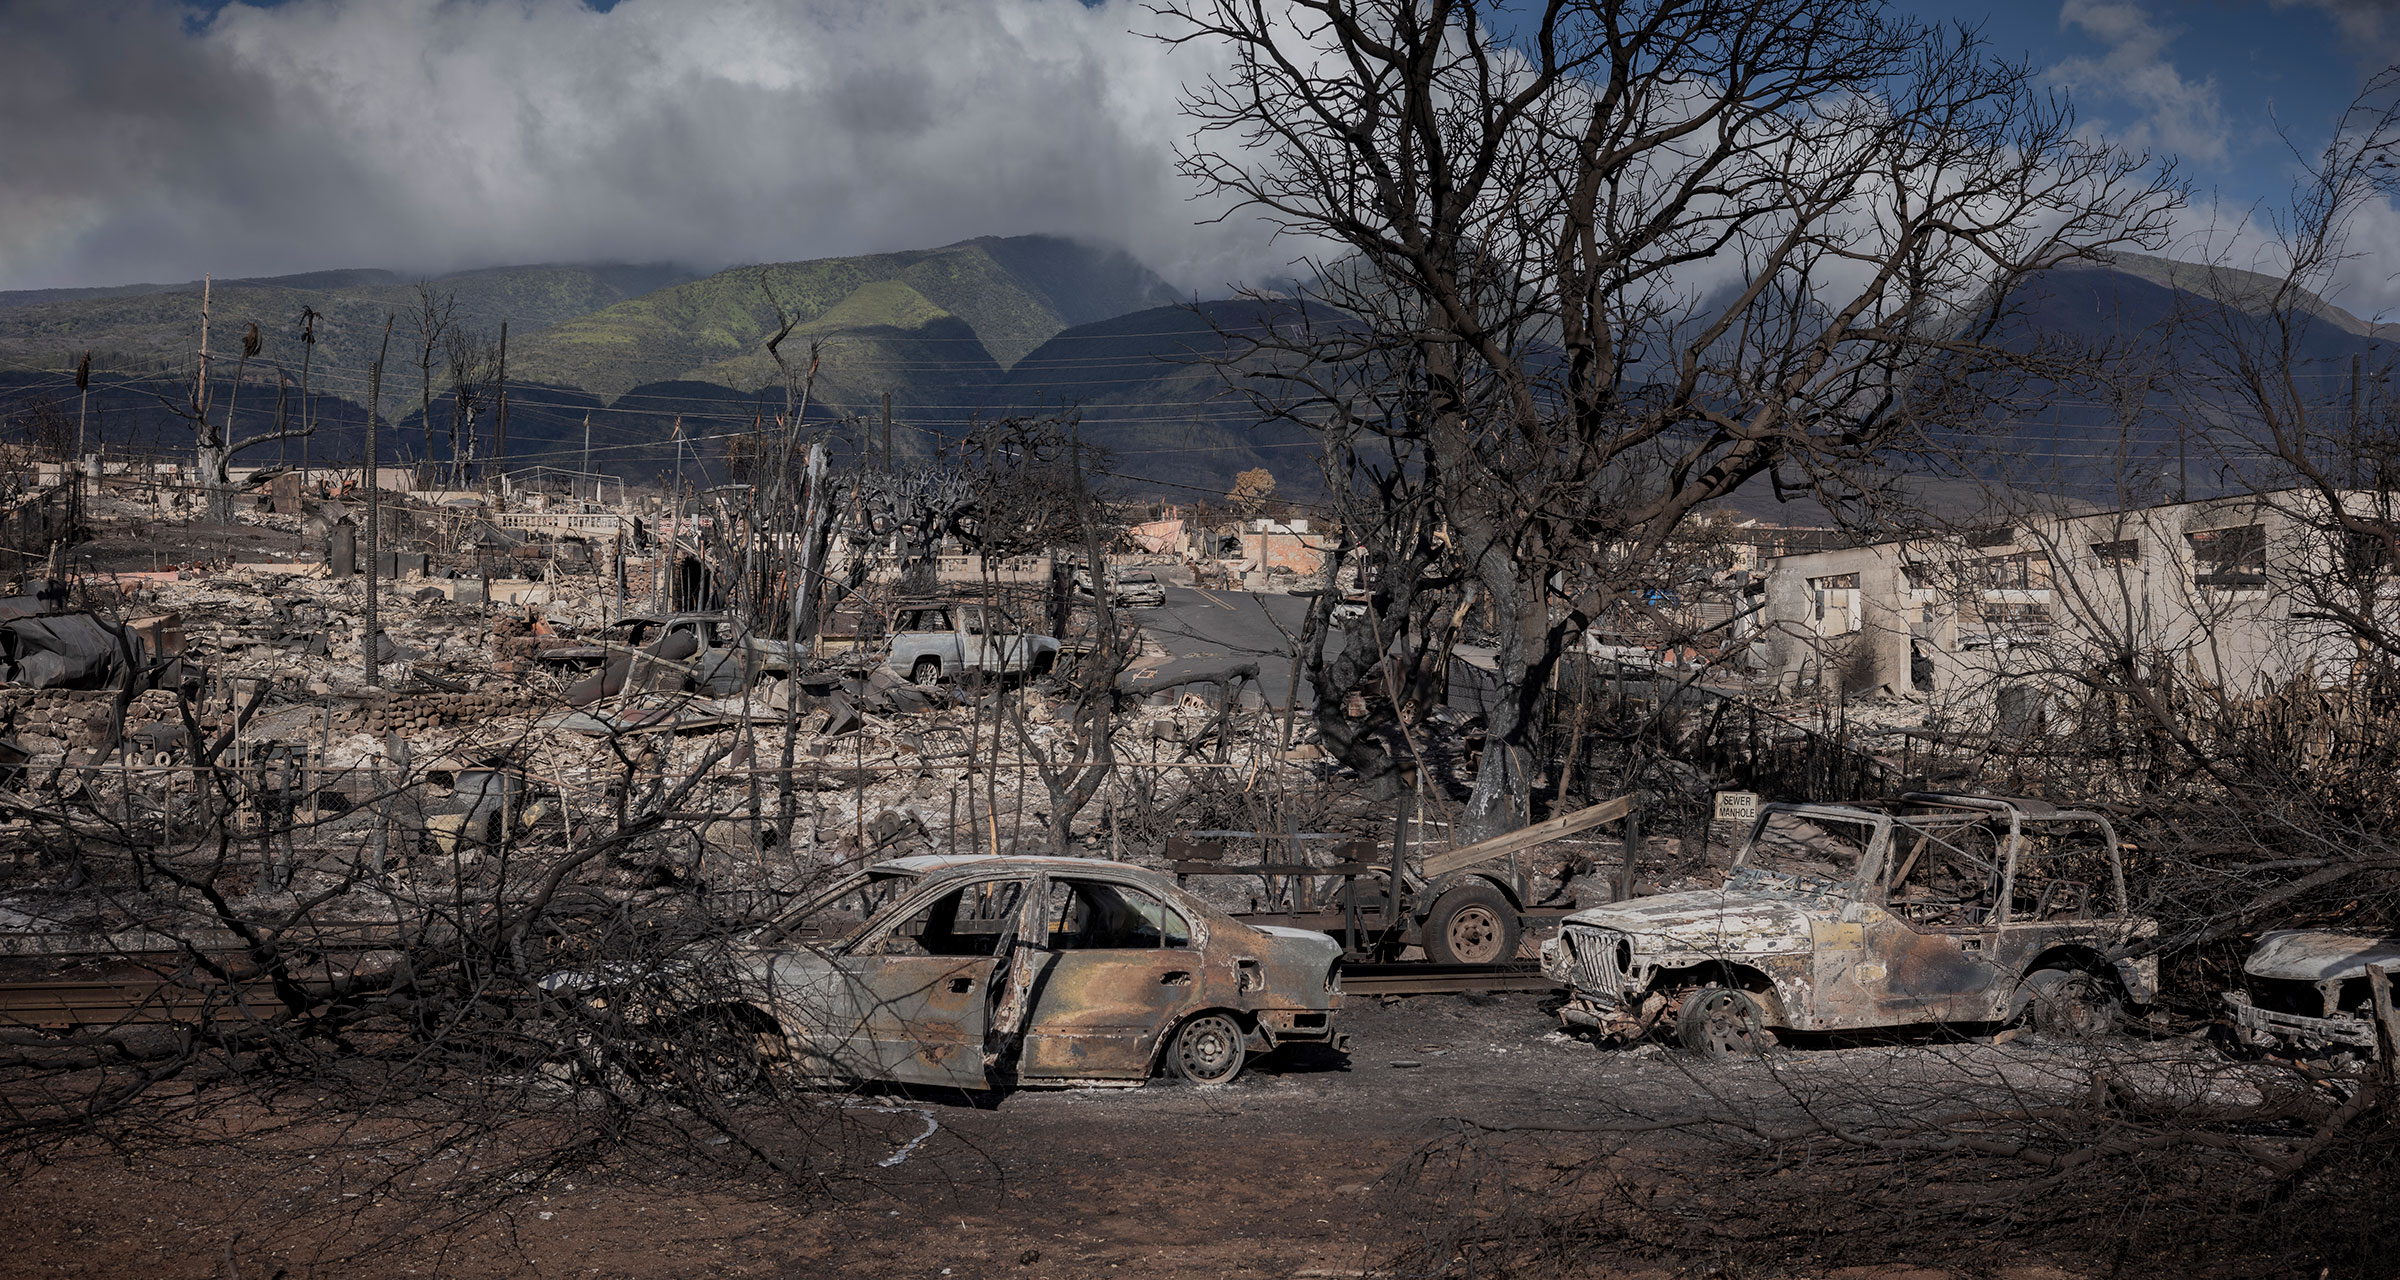 The landscape of destruction in Lahaina, Maui, seen on Aug. 14. (David Butow for TIME)